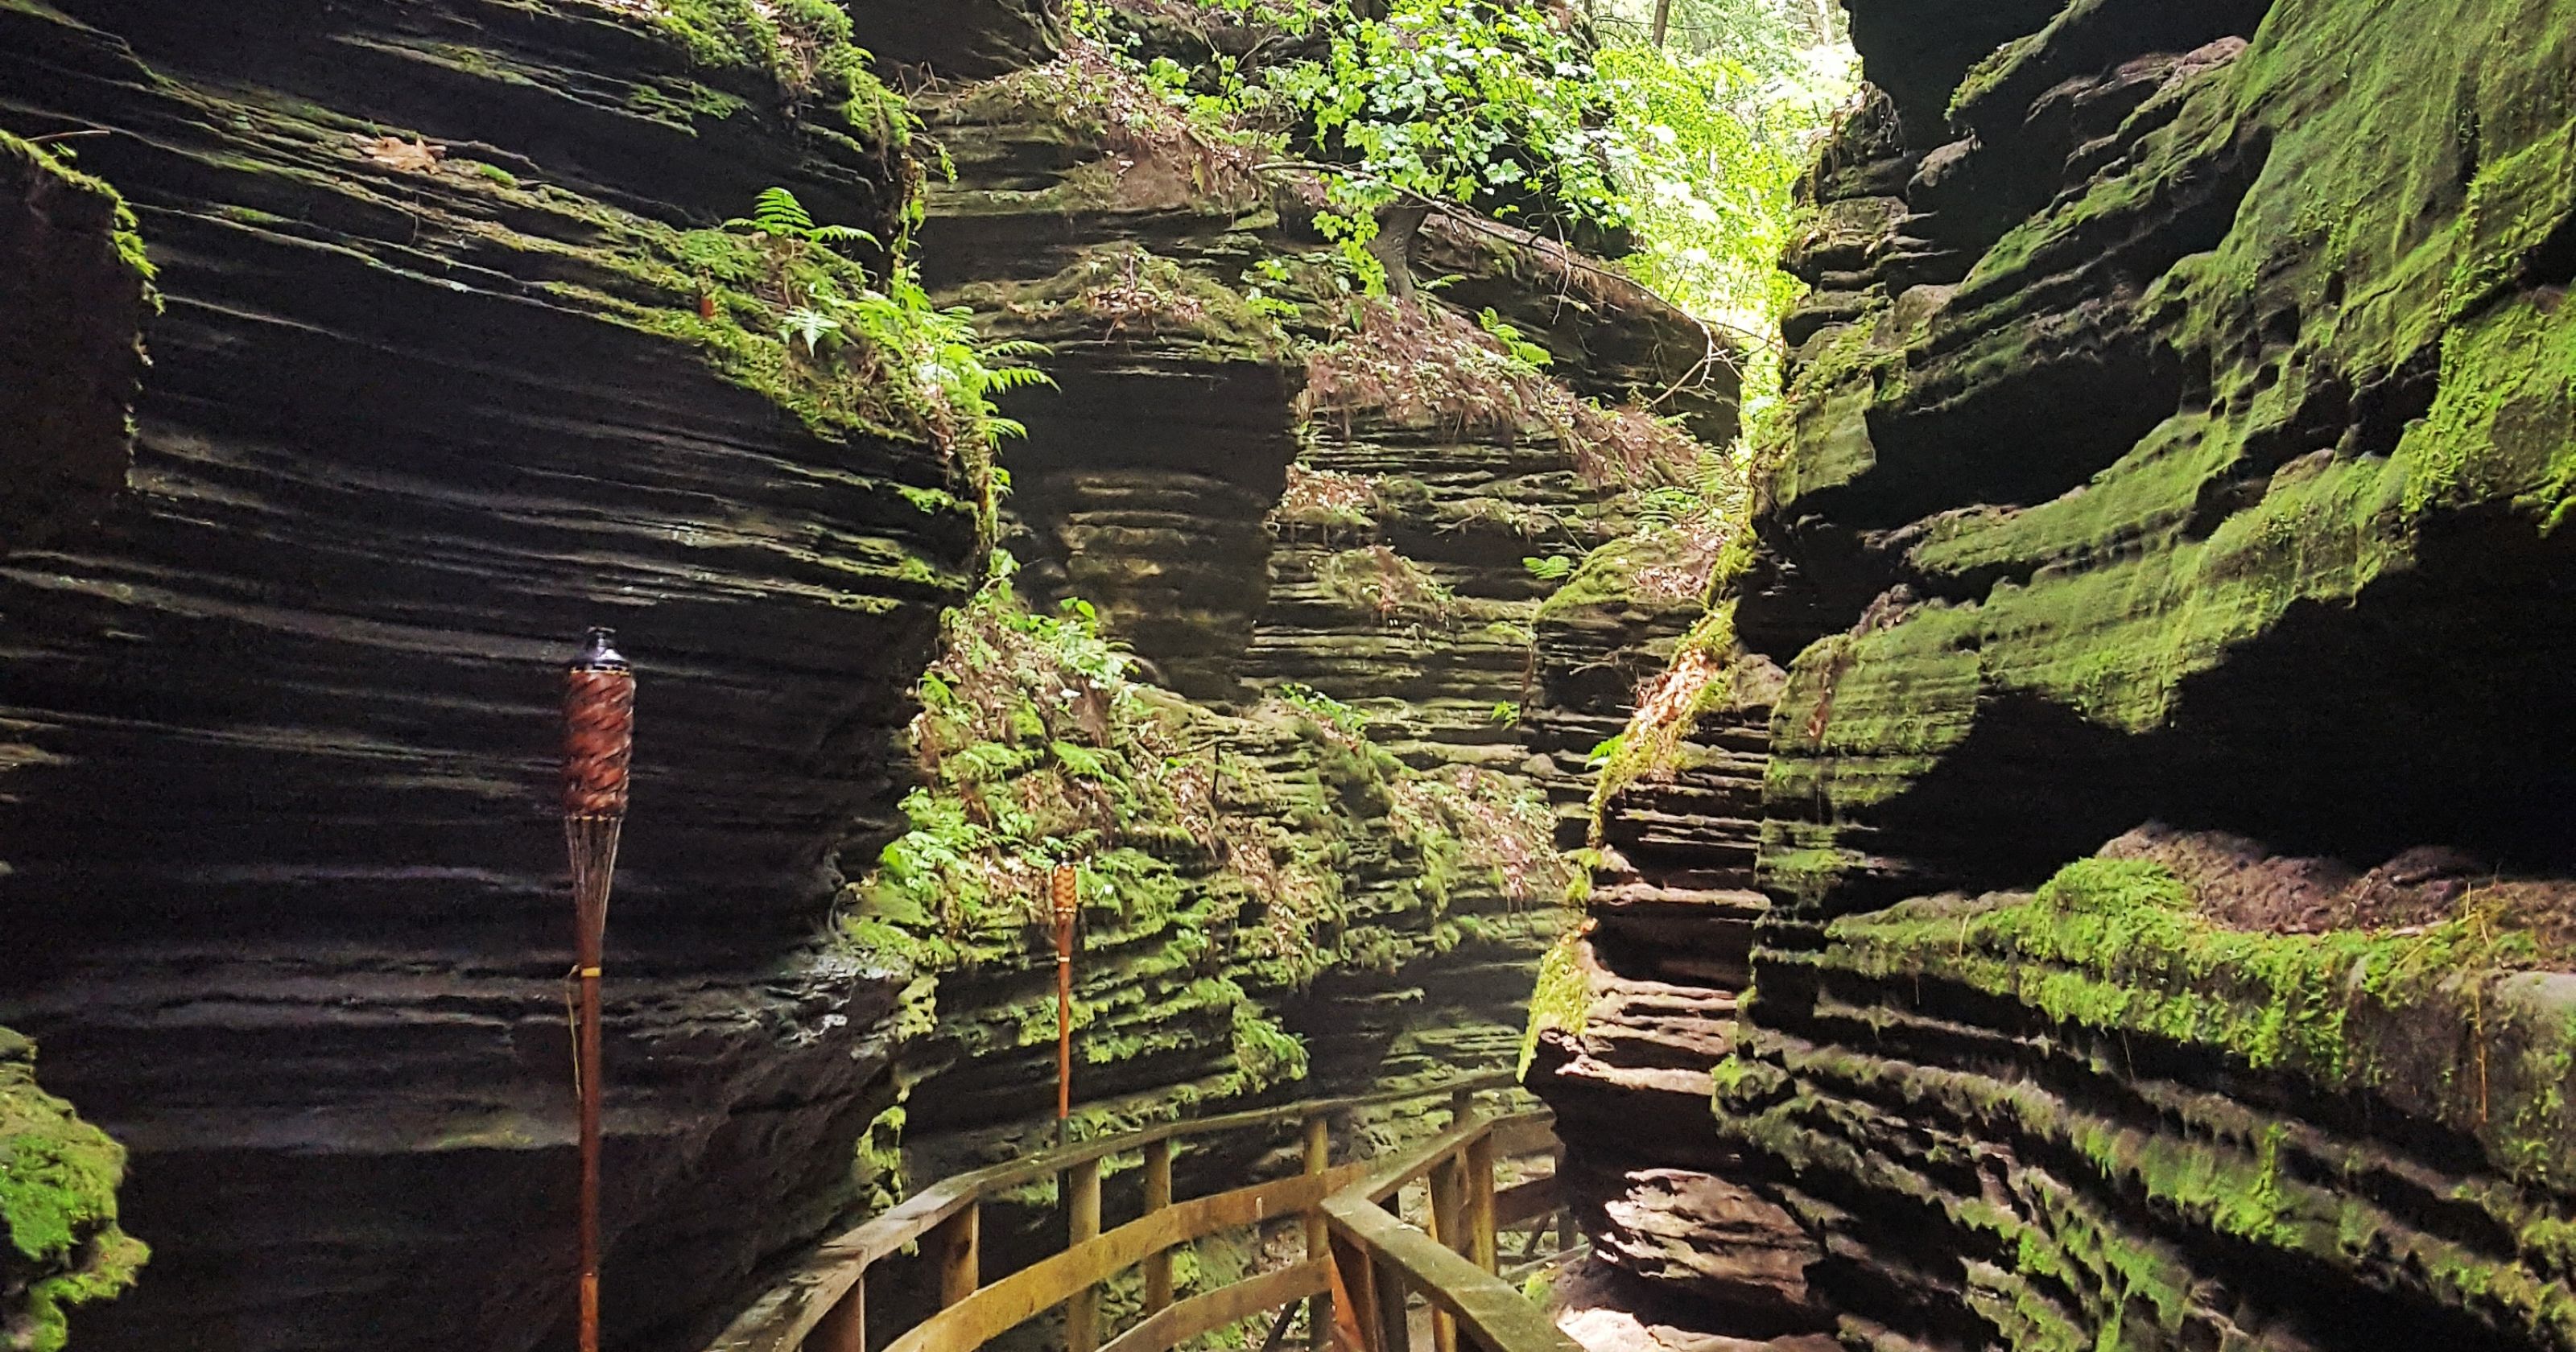 Trip Tips: Things to do in the Dells and Baraboo